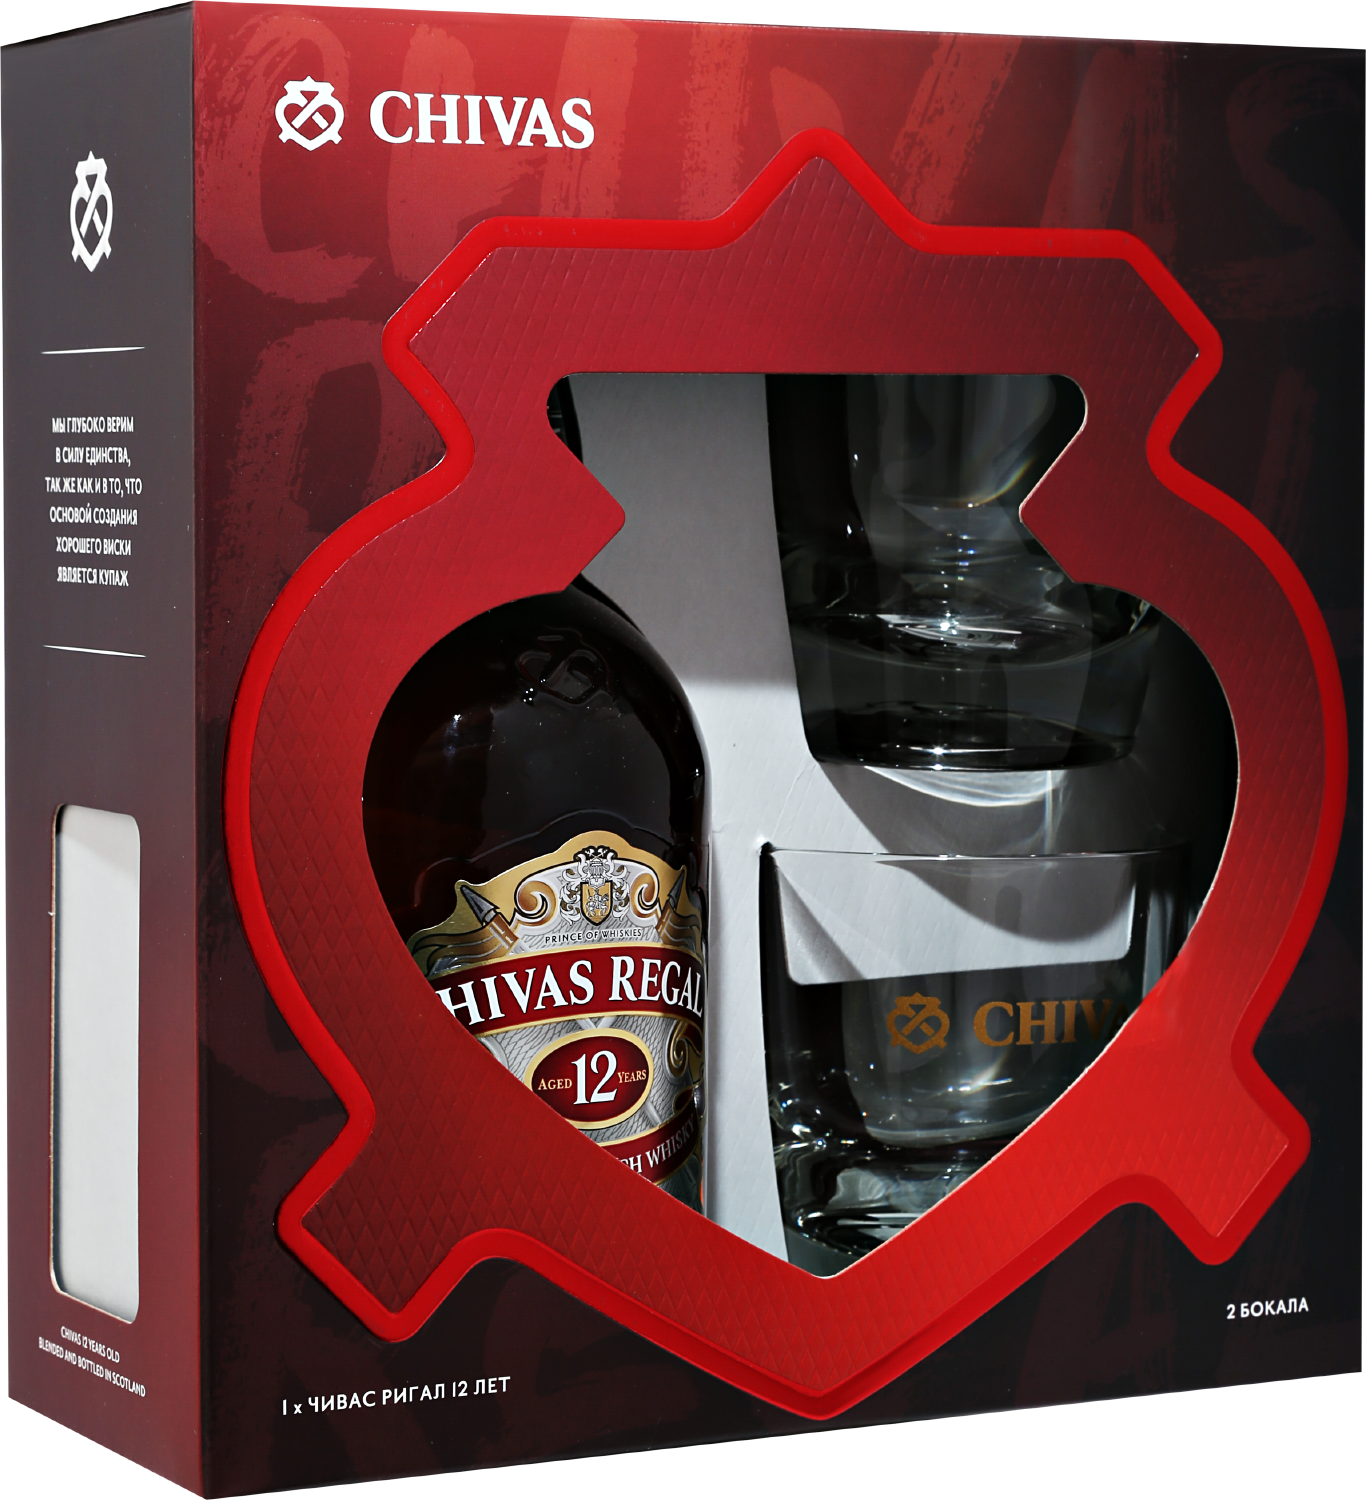 Chivas Regal Blended Scotch Whisky 12 y.o. (gift box with 2 glasses) jamie stuart blended scotch whisky 3 y o gift box with 2 glasses